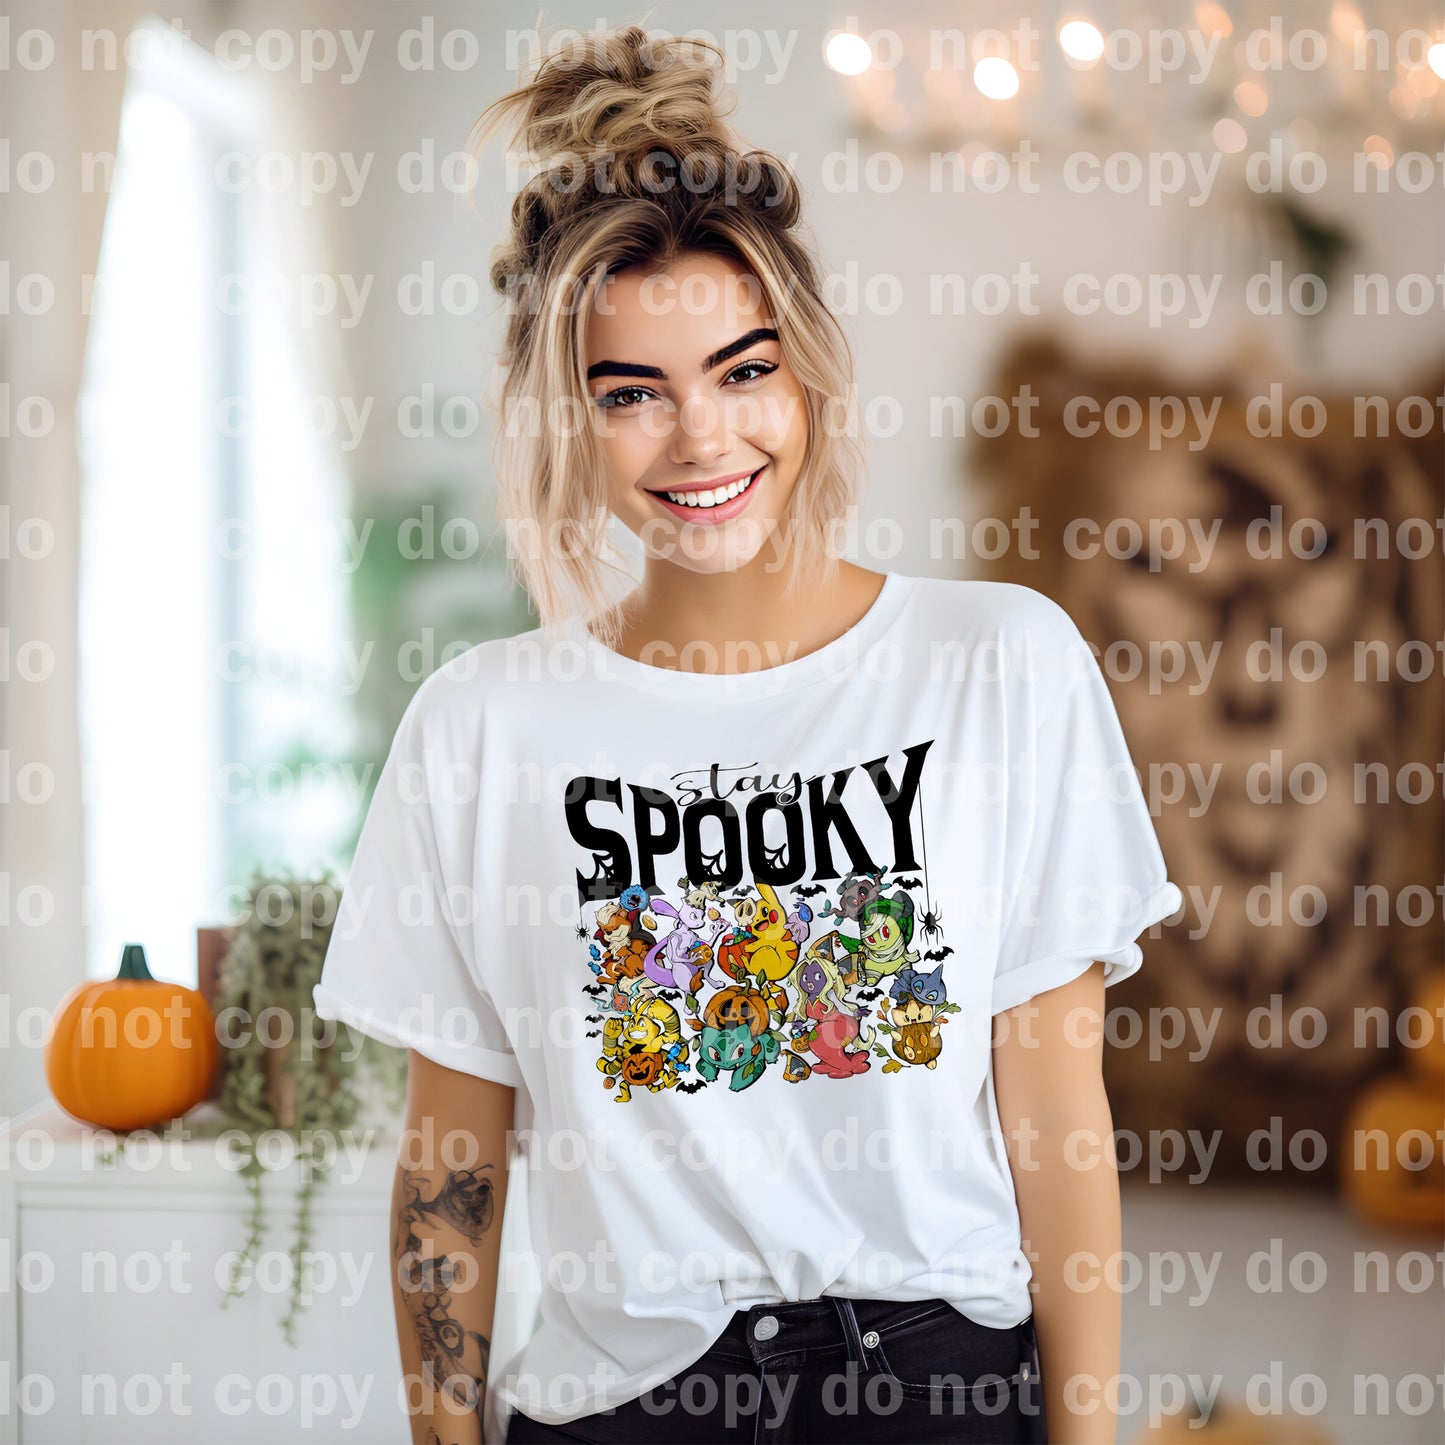 Stay Spooky Pocket Monster Dream Print or Sublimation Print